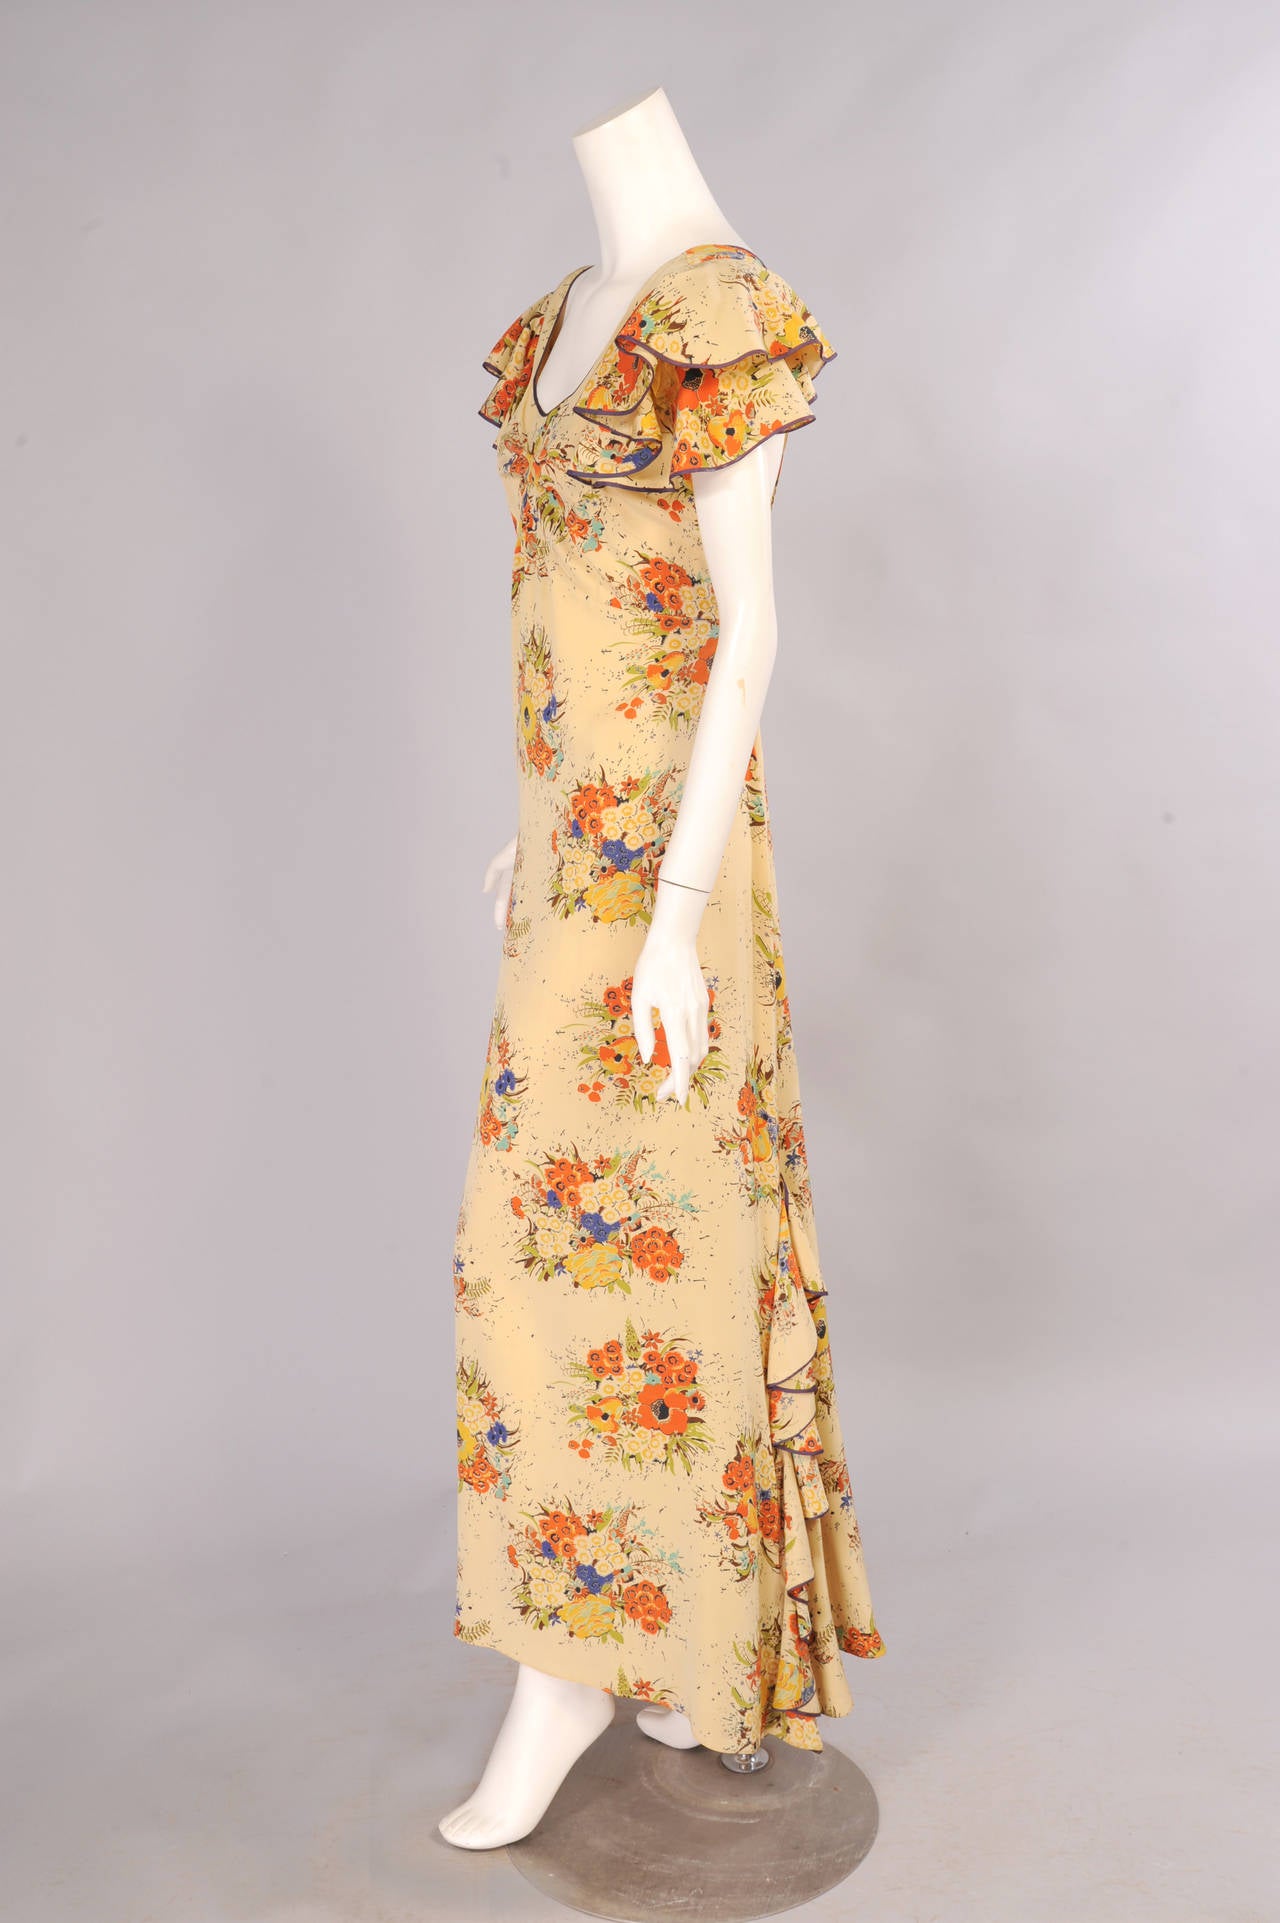 A charming floral bouquet adds color to this pale butter yellow silk dress that is piped in navy blue at the neckline, on the sleeves and the flirty ruffles on the train. The dress has wide straps that criss cross in back above a snap closure. It is